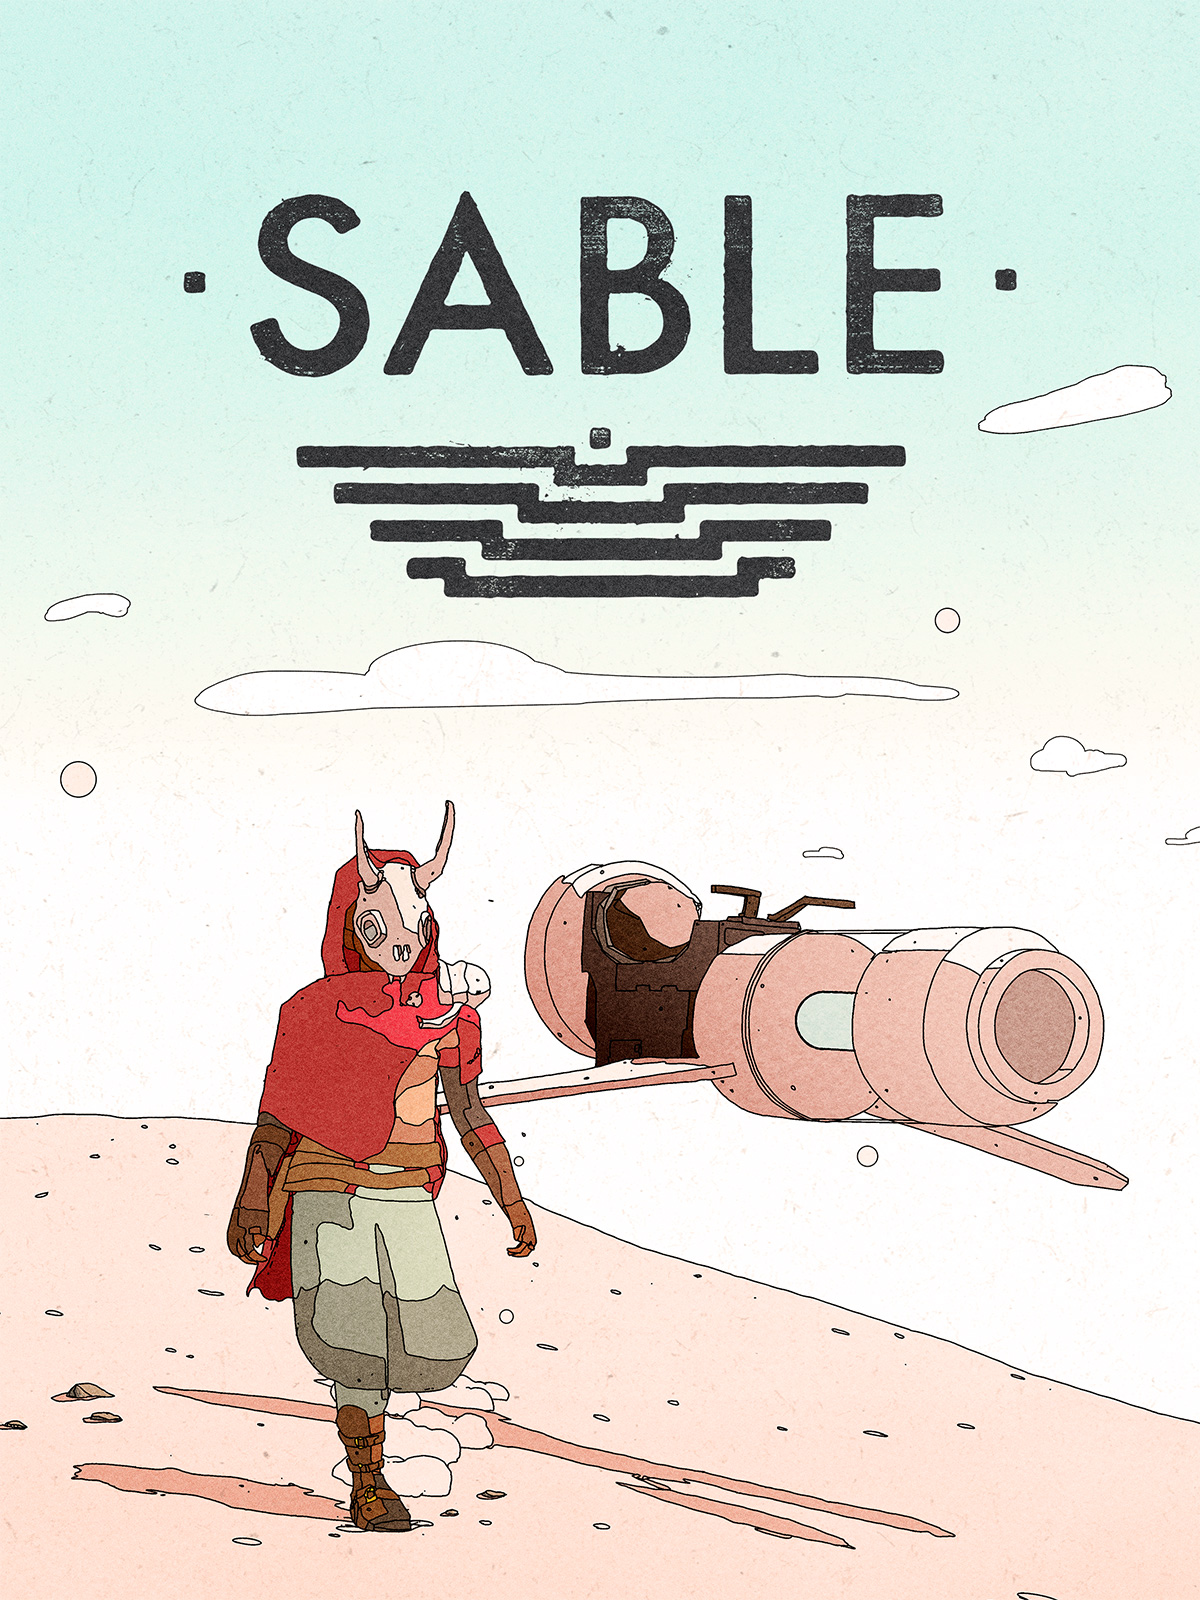 Cover Sable